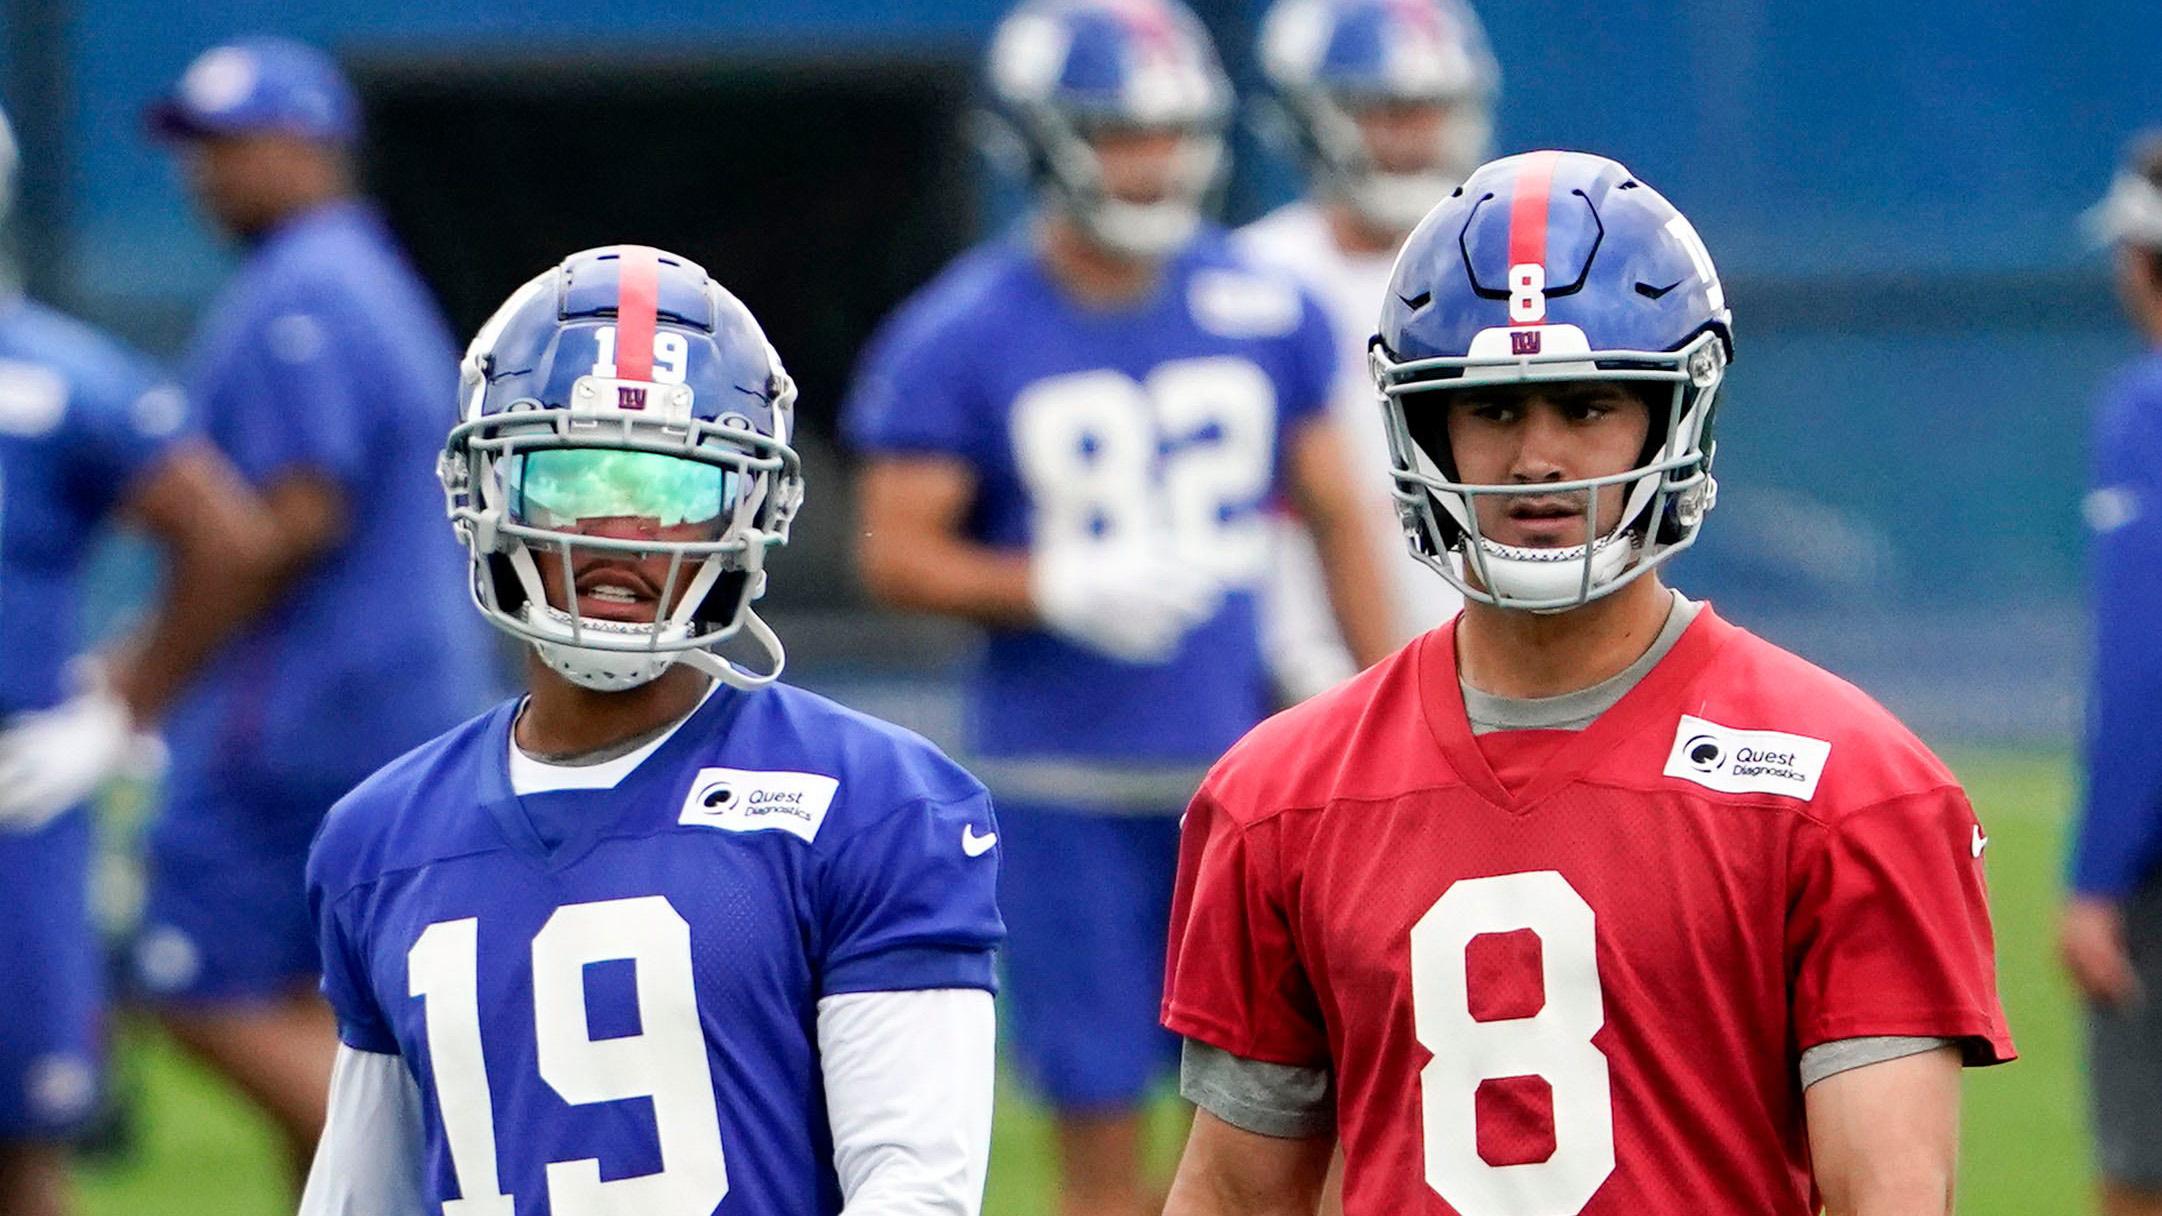 New York Giants wide receiver Kenny Golladay (19) and quarterback Daniel Jones (8) walk on the field together during OTA practice at the Quest Diagnostics Training Center / Danielle Parhizkaran/USA TODAY